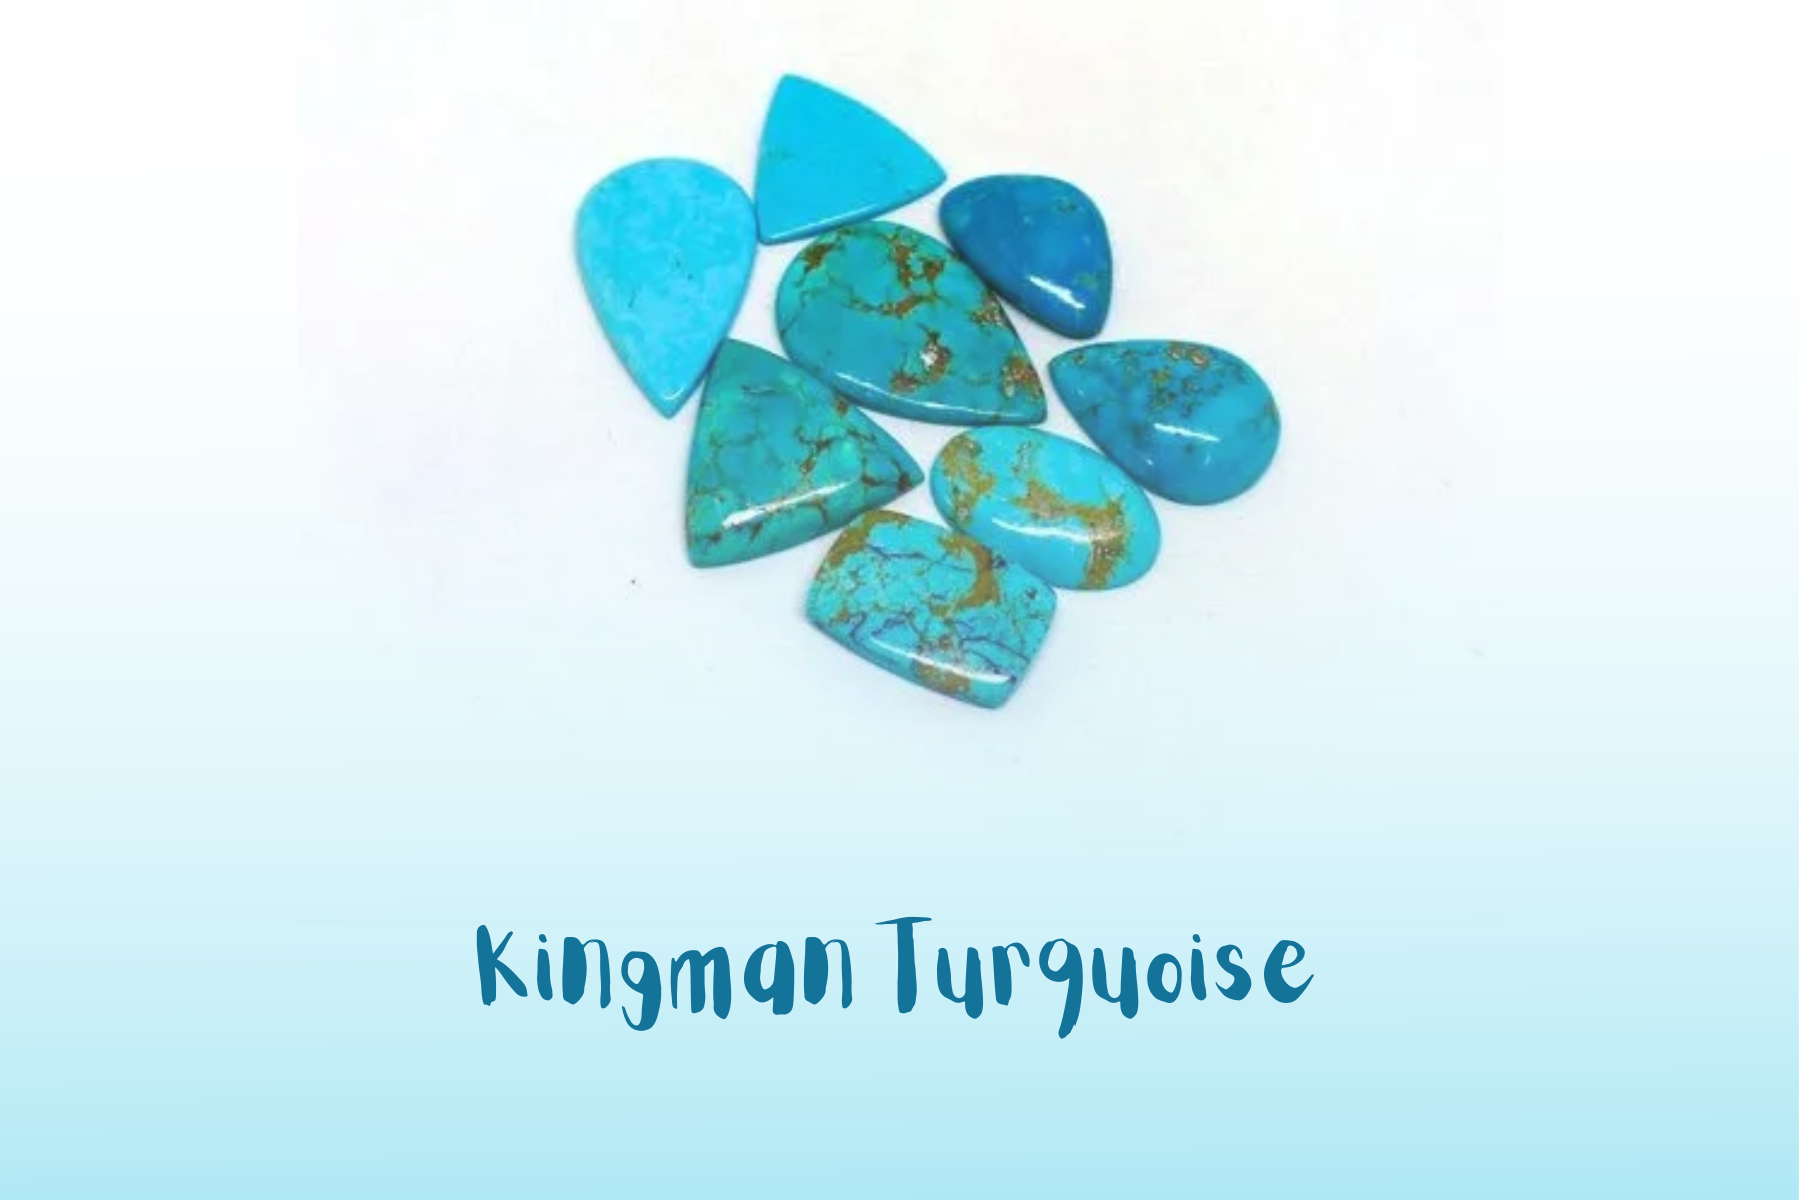 Different shapes and sizes of Kingman turquoise stones